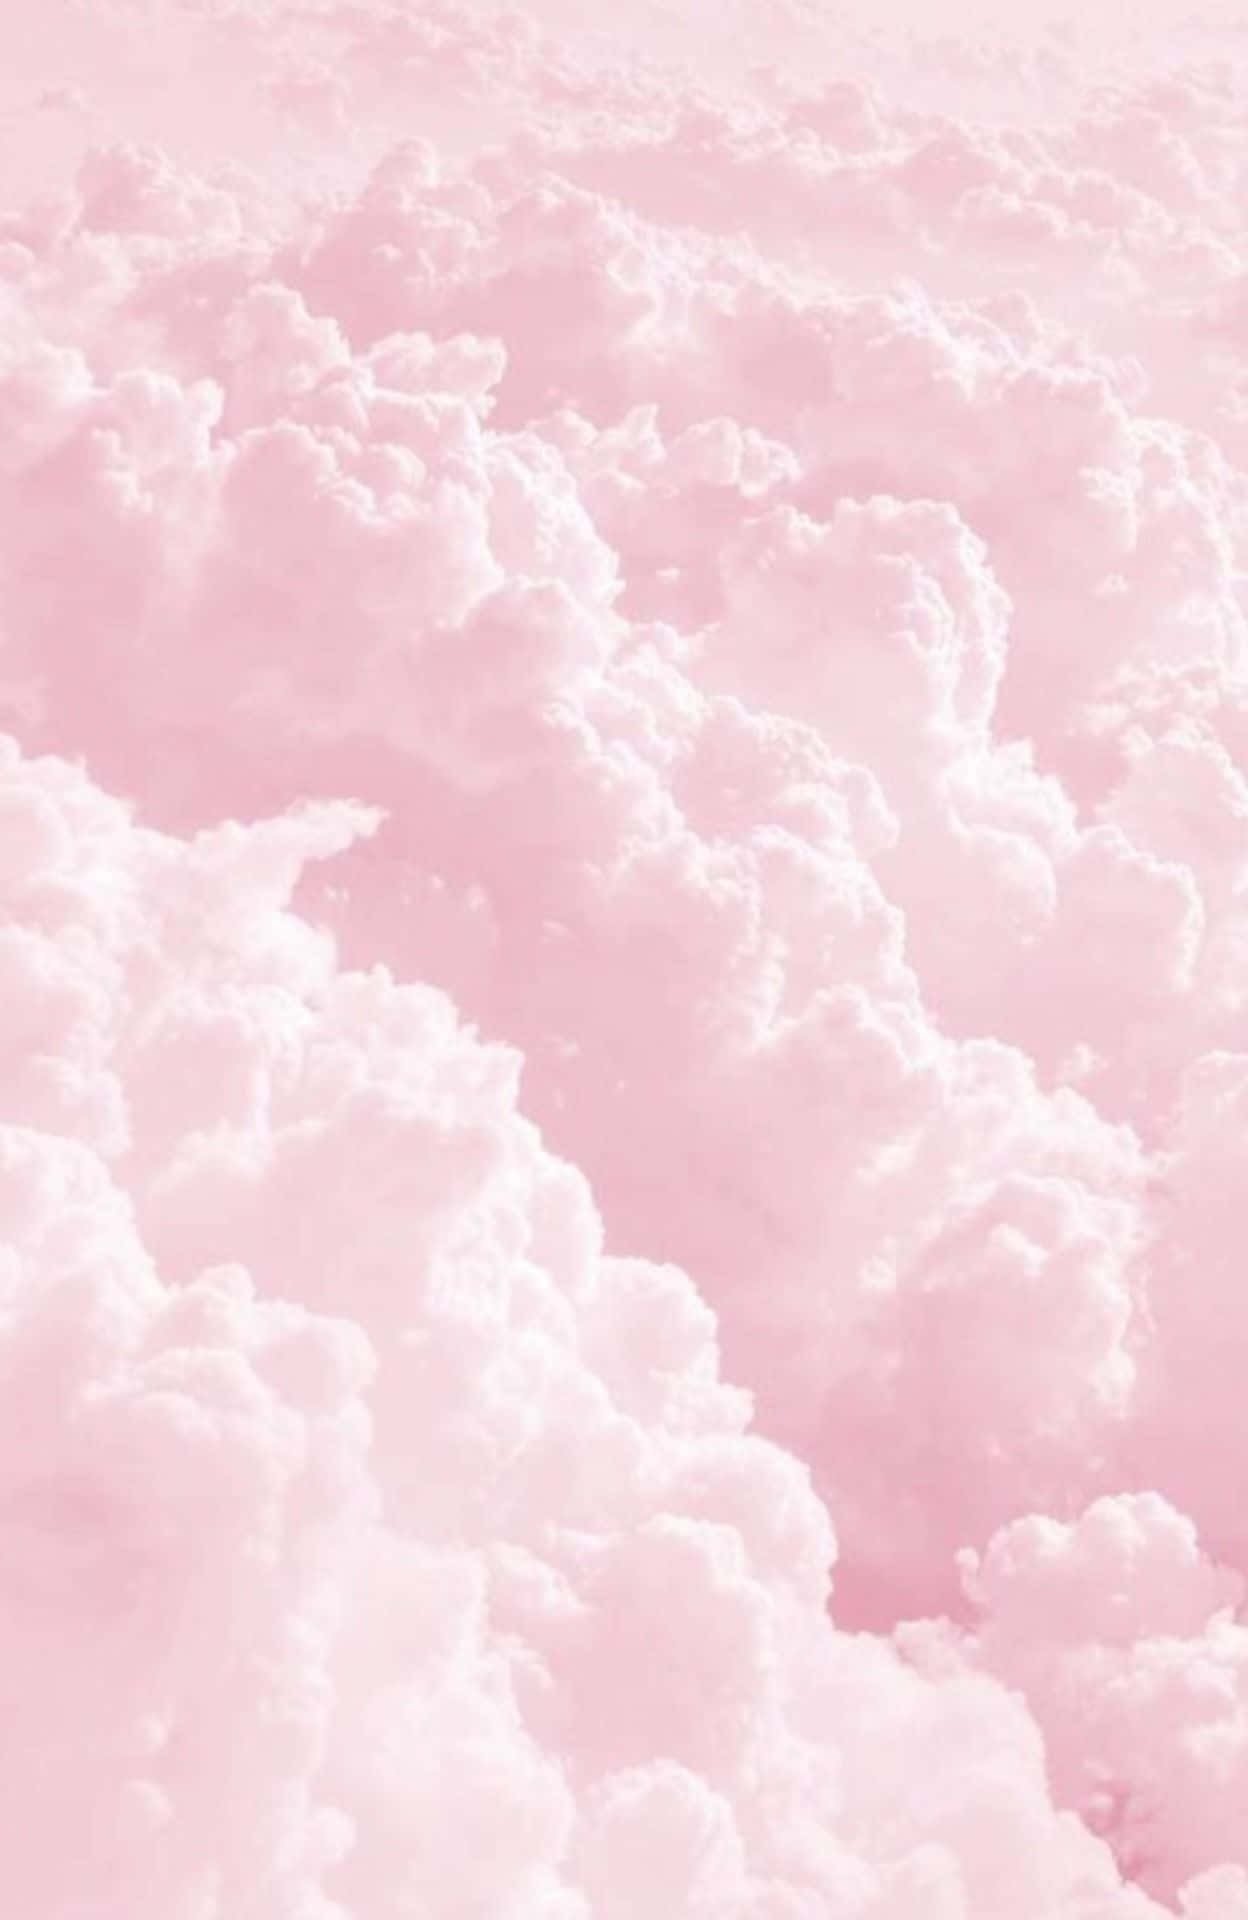 pink clouds in the sky with a pink background